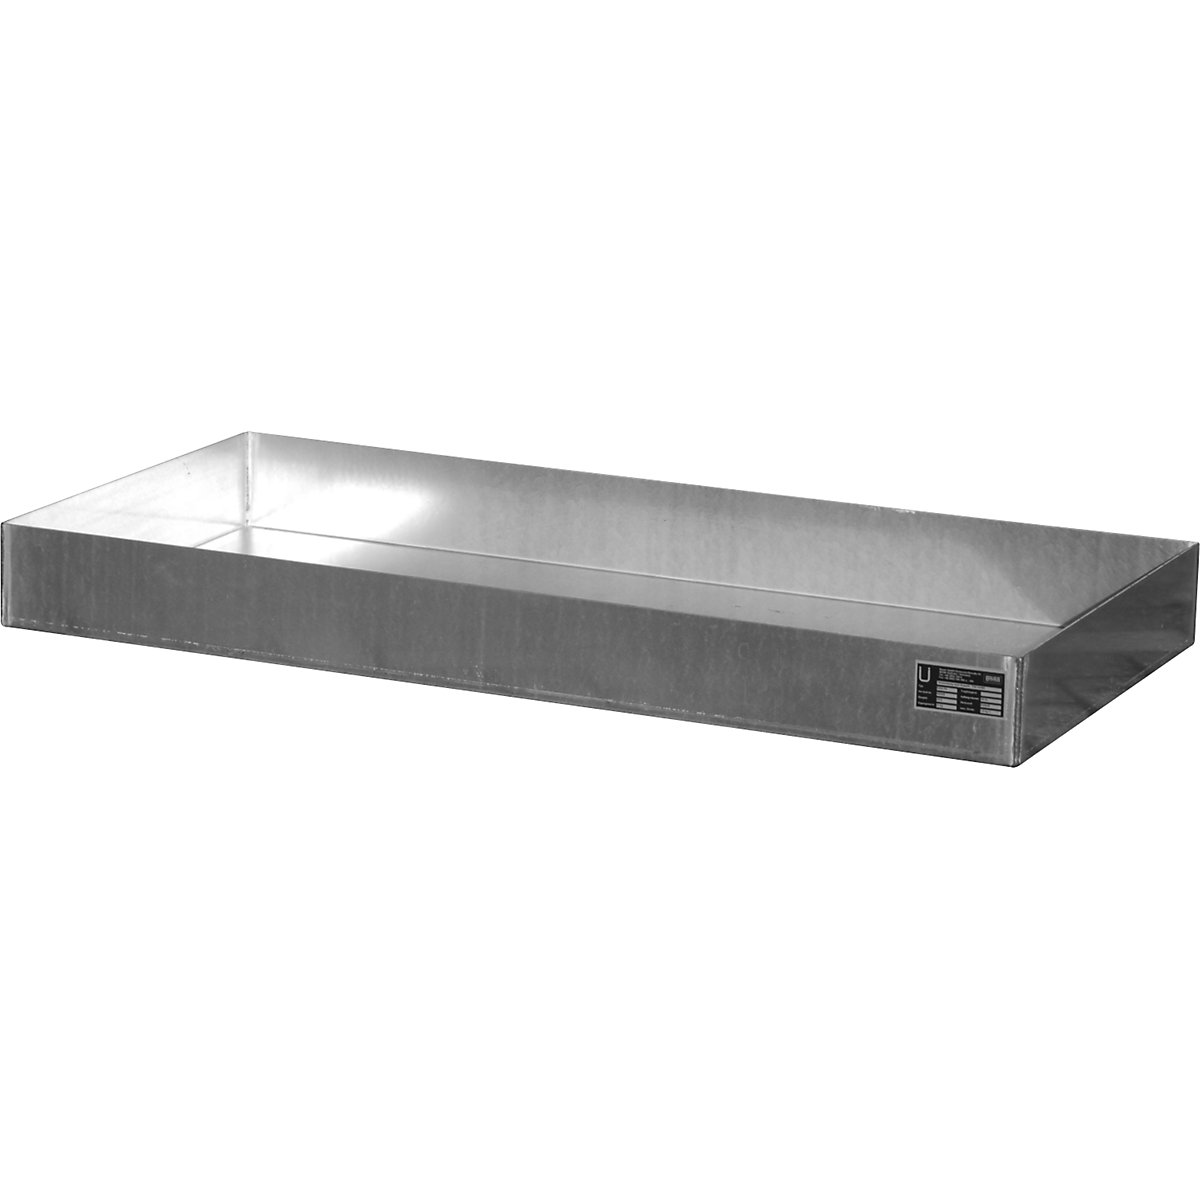 Stainless steel pallet tray – eurokraft pro, for small containers, 60 l, LxWxH 1200 x 600 x 120 mm-5